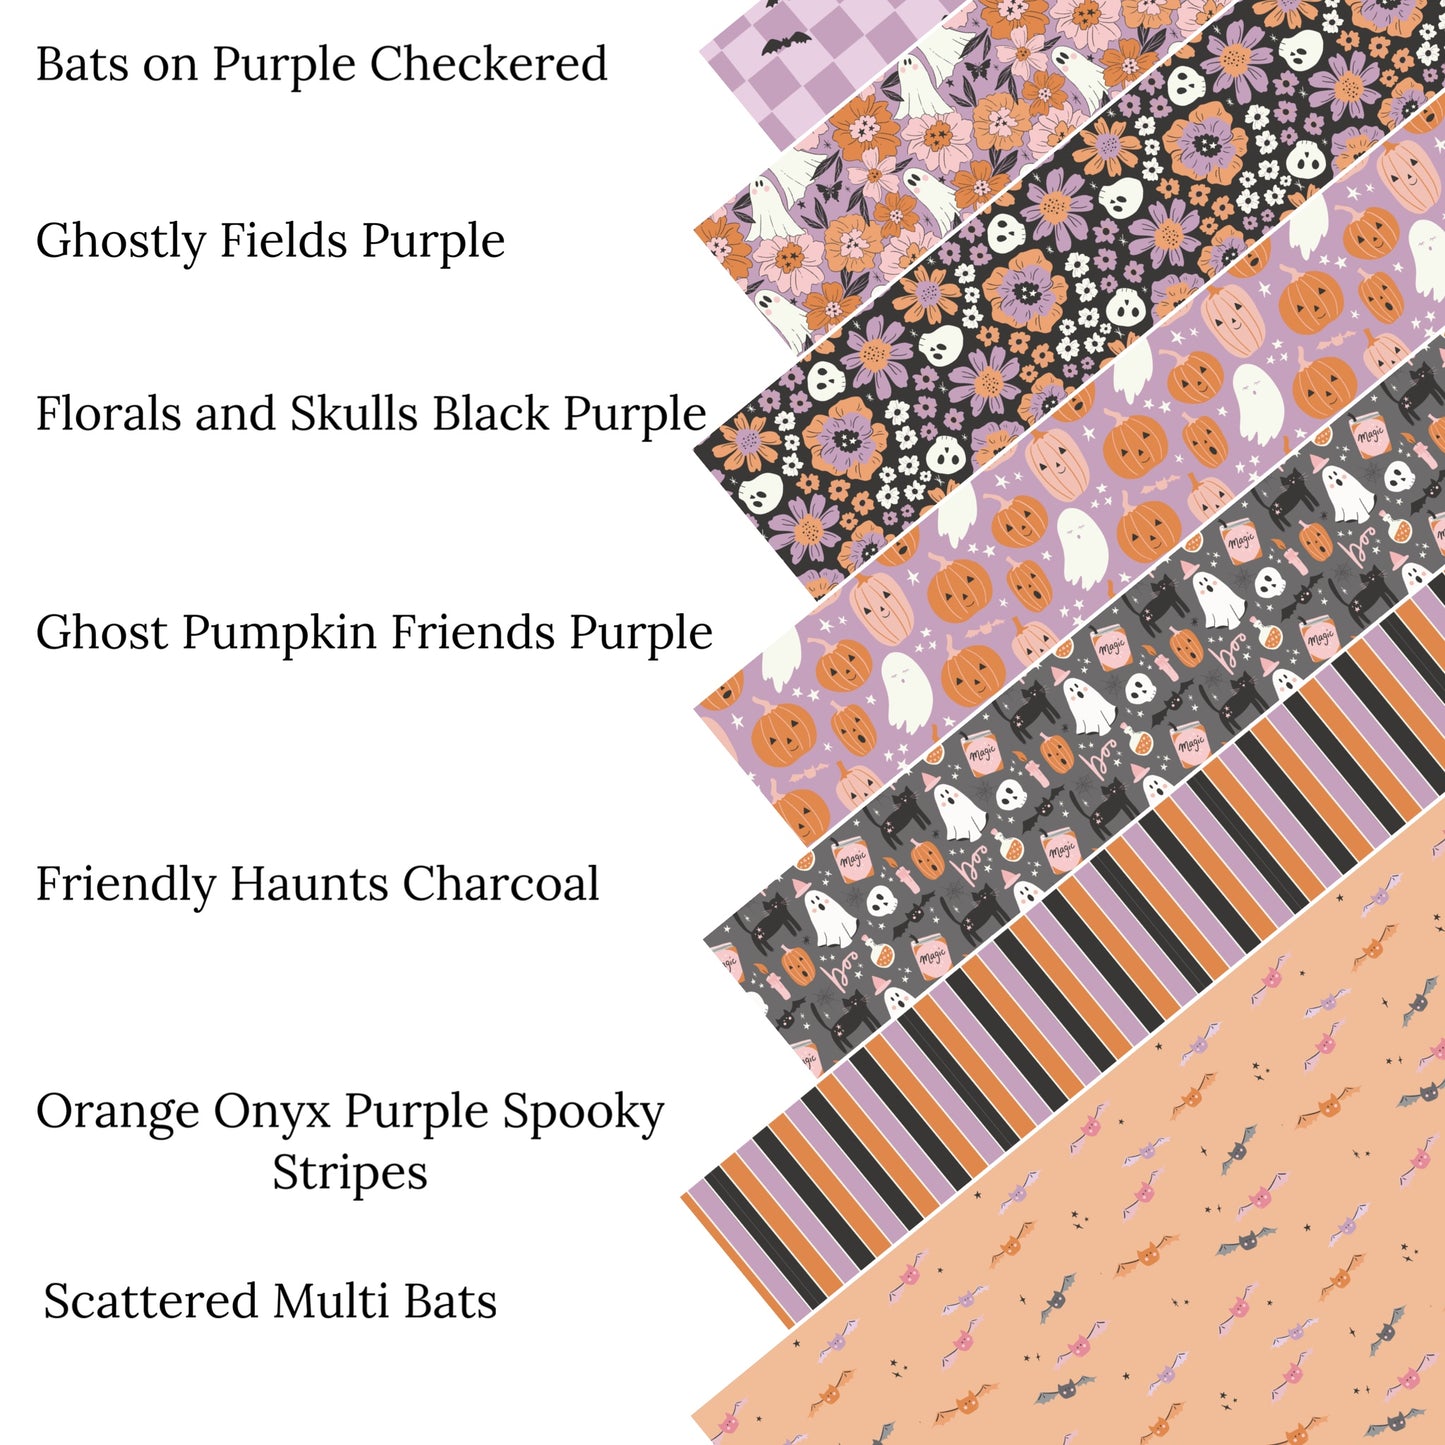 Orange, Onyx, and Purple Spooky Stripes Faux Leather Sheets